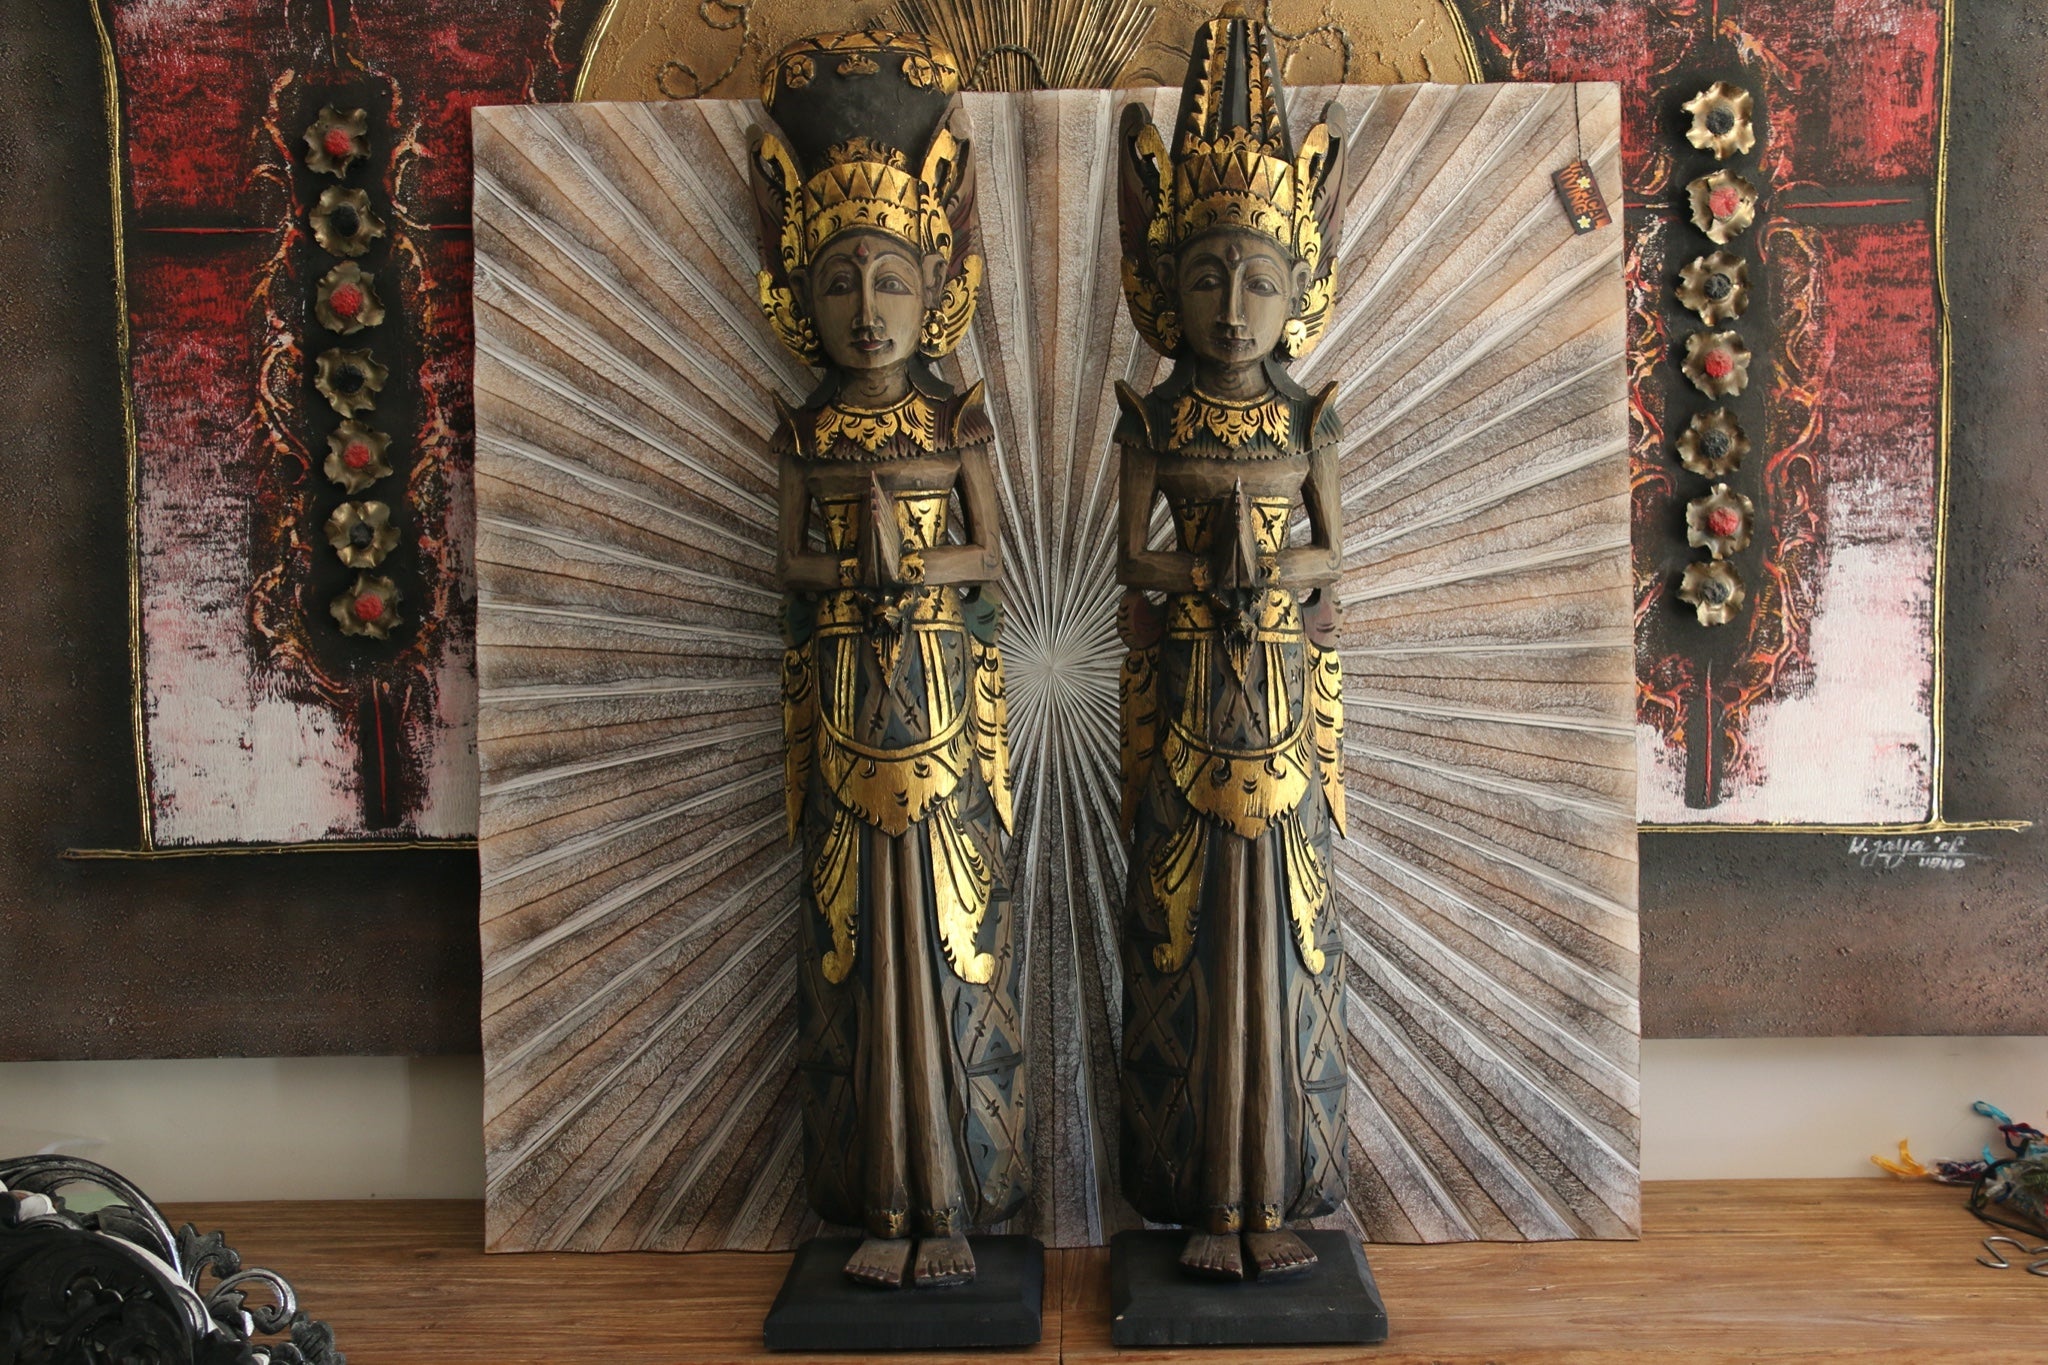 NEW Balinese Hand Carved Wooden Rama & Shinta Sculptures - Set of 2 1m tall